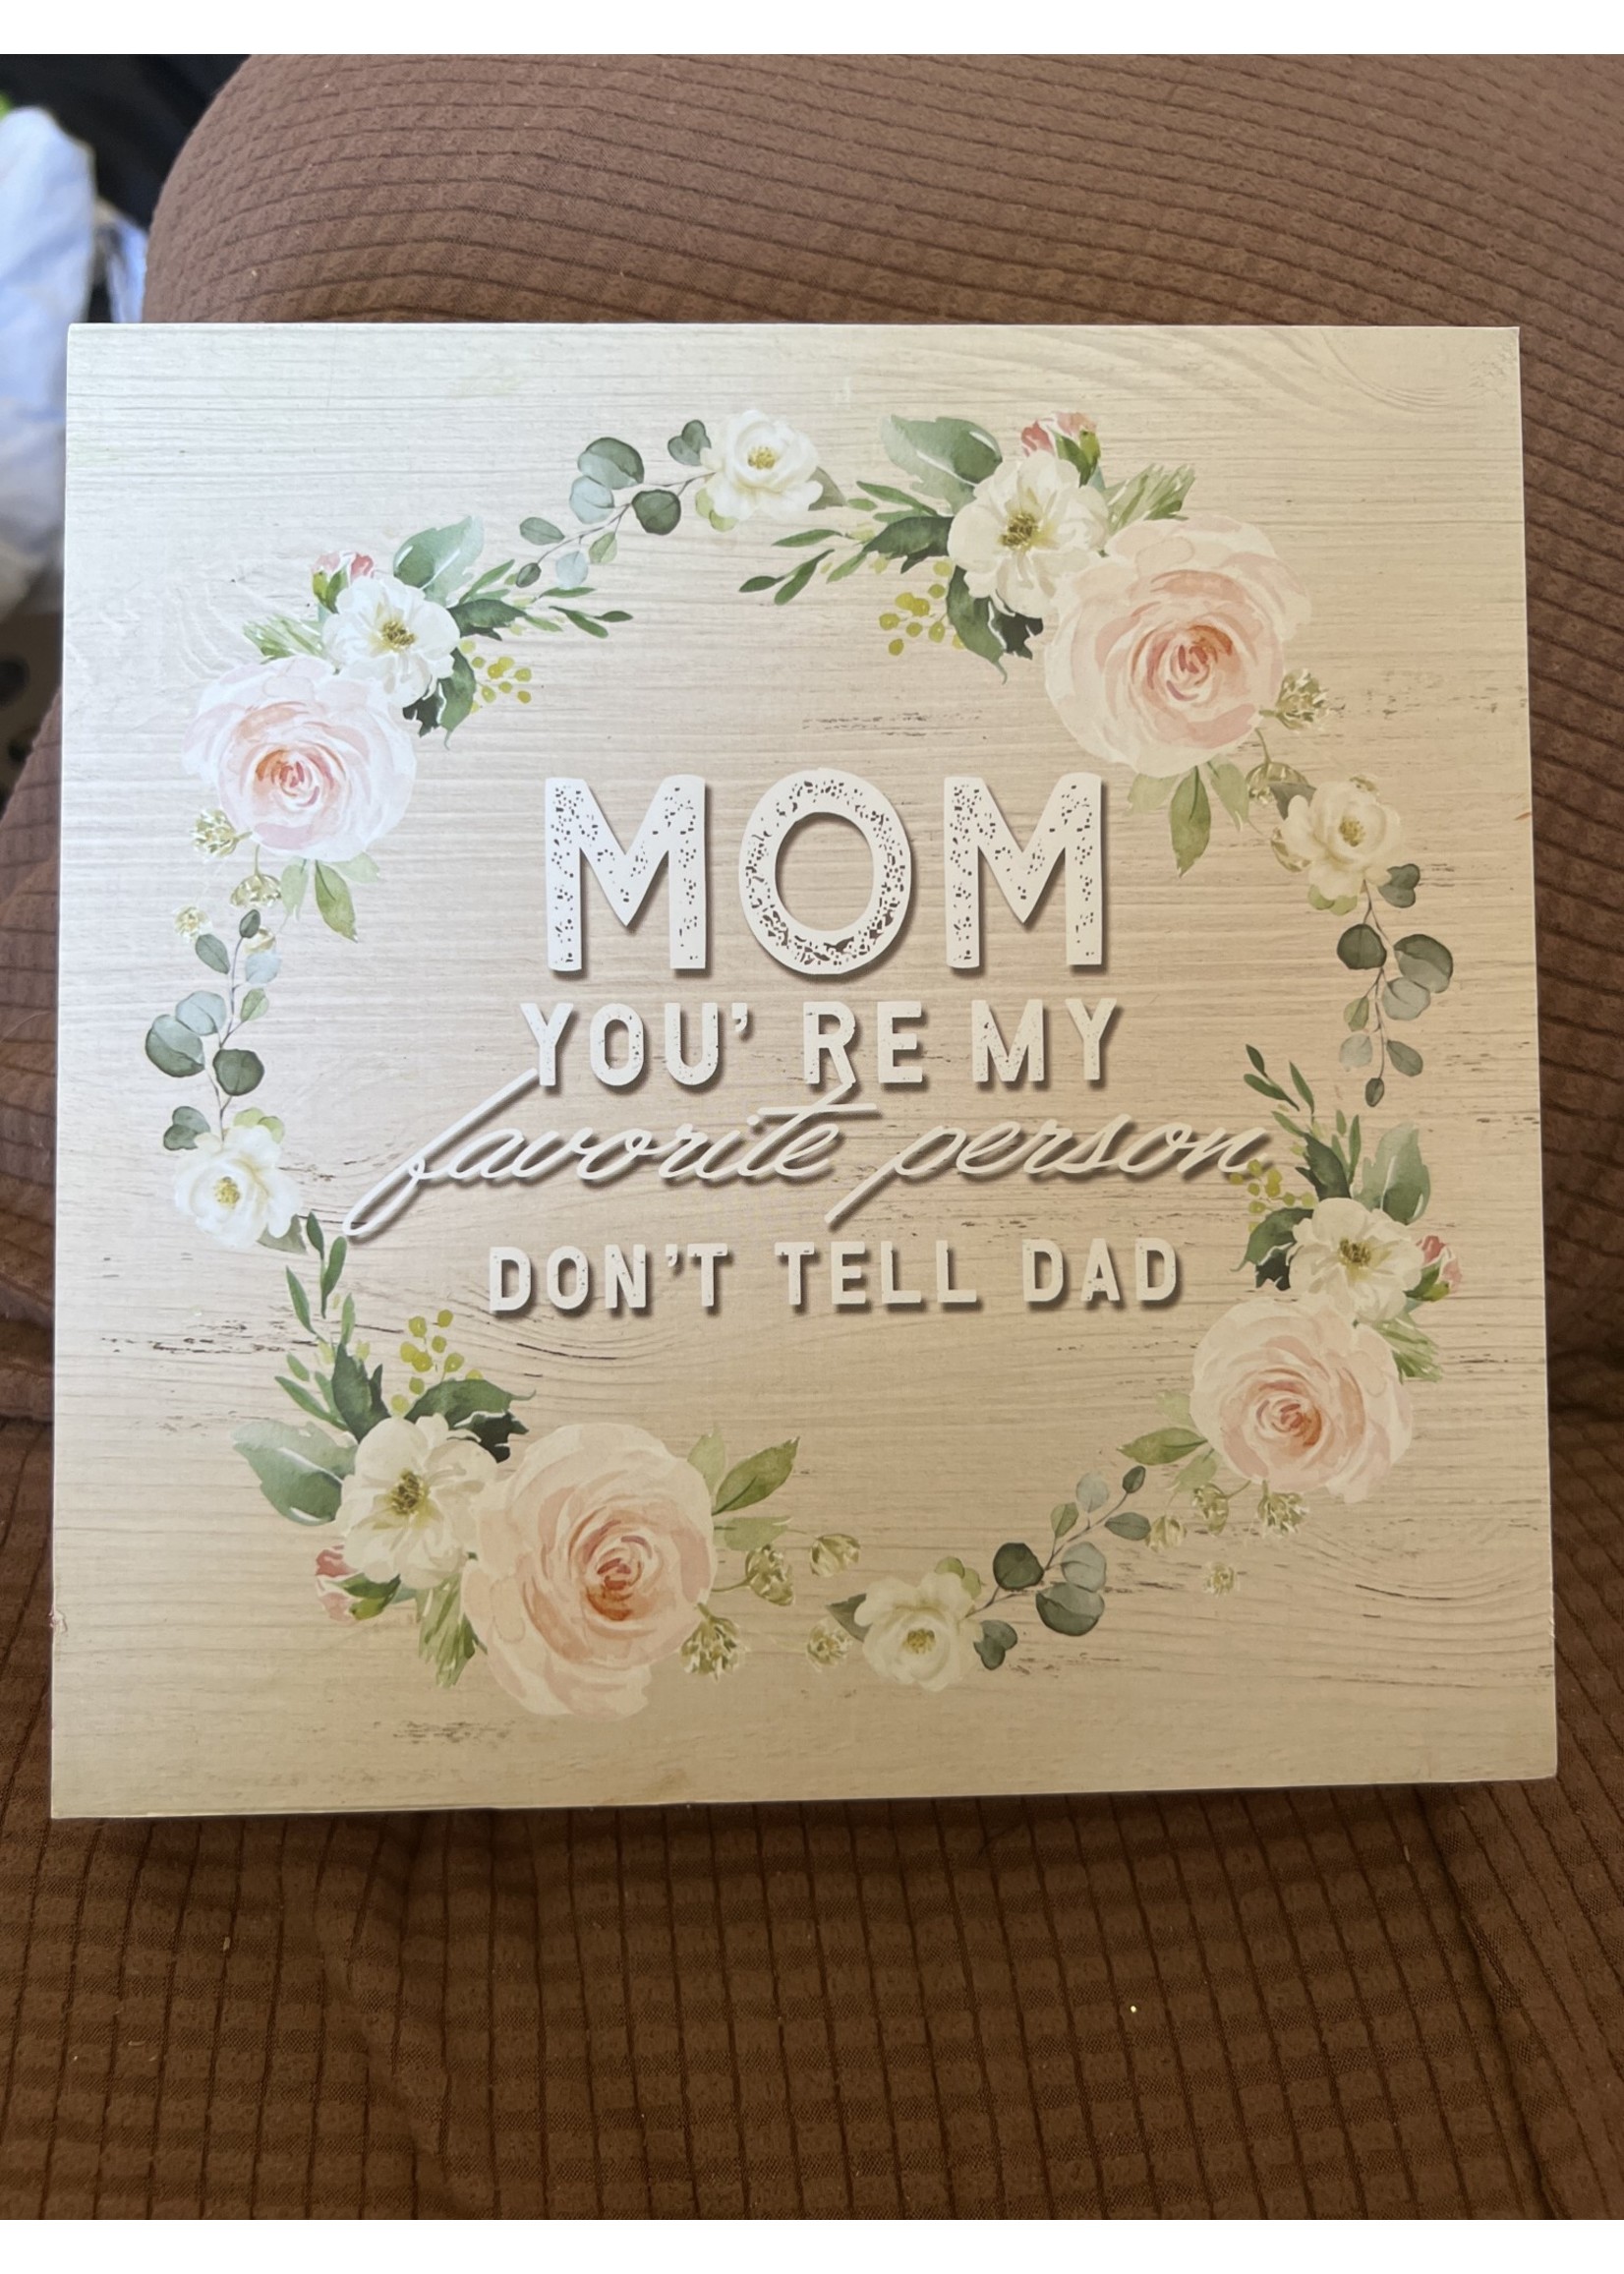 Mom You’re My Favorite Person: Don’t Tell Dad home decor Mothers Day wooden sign